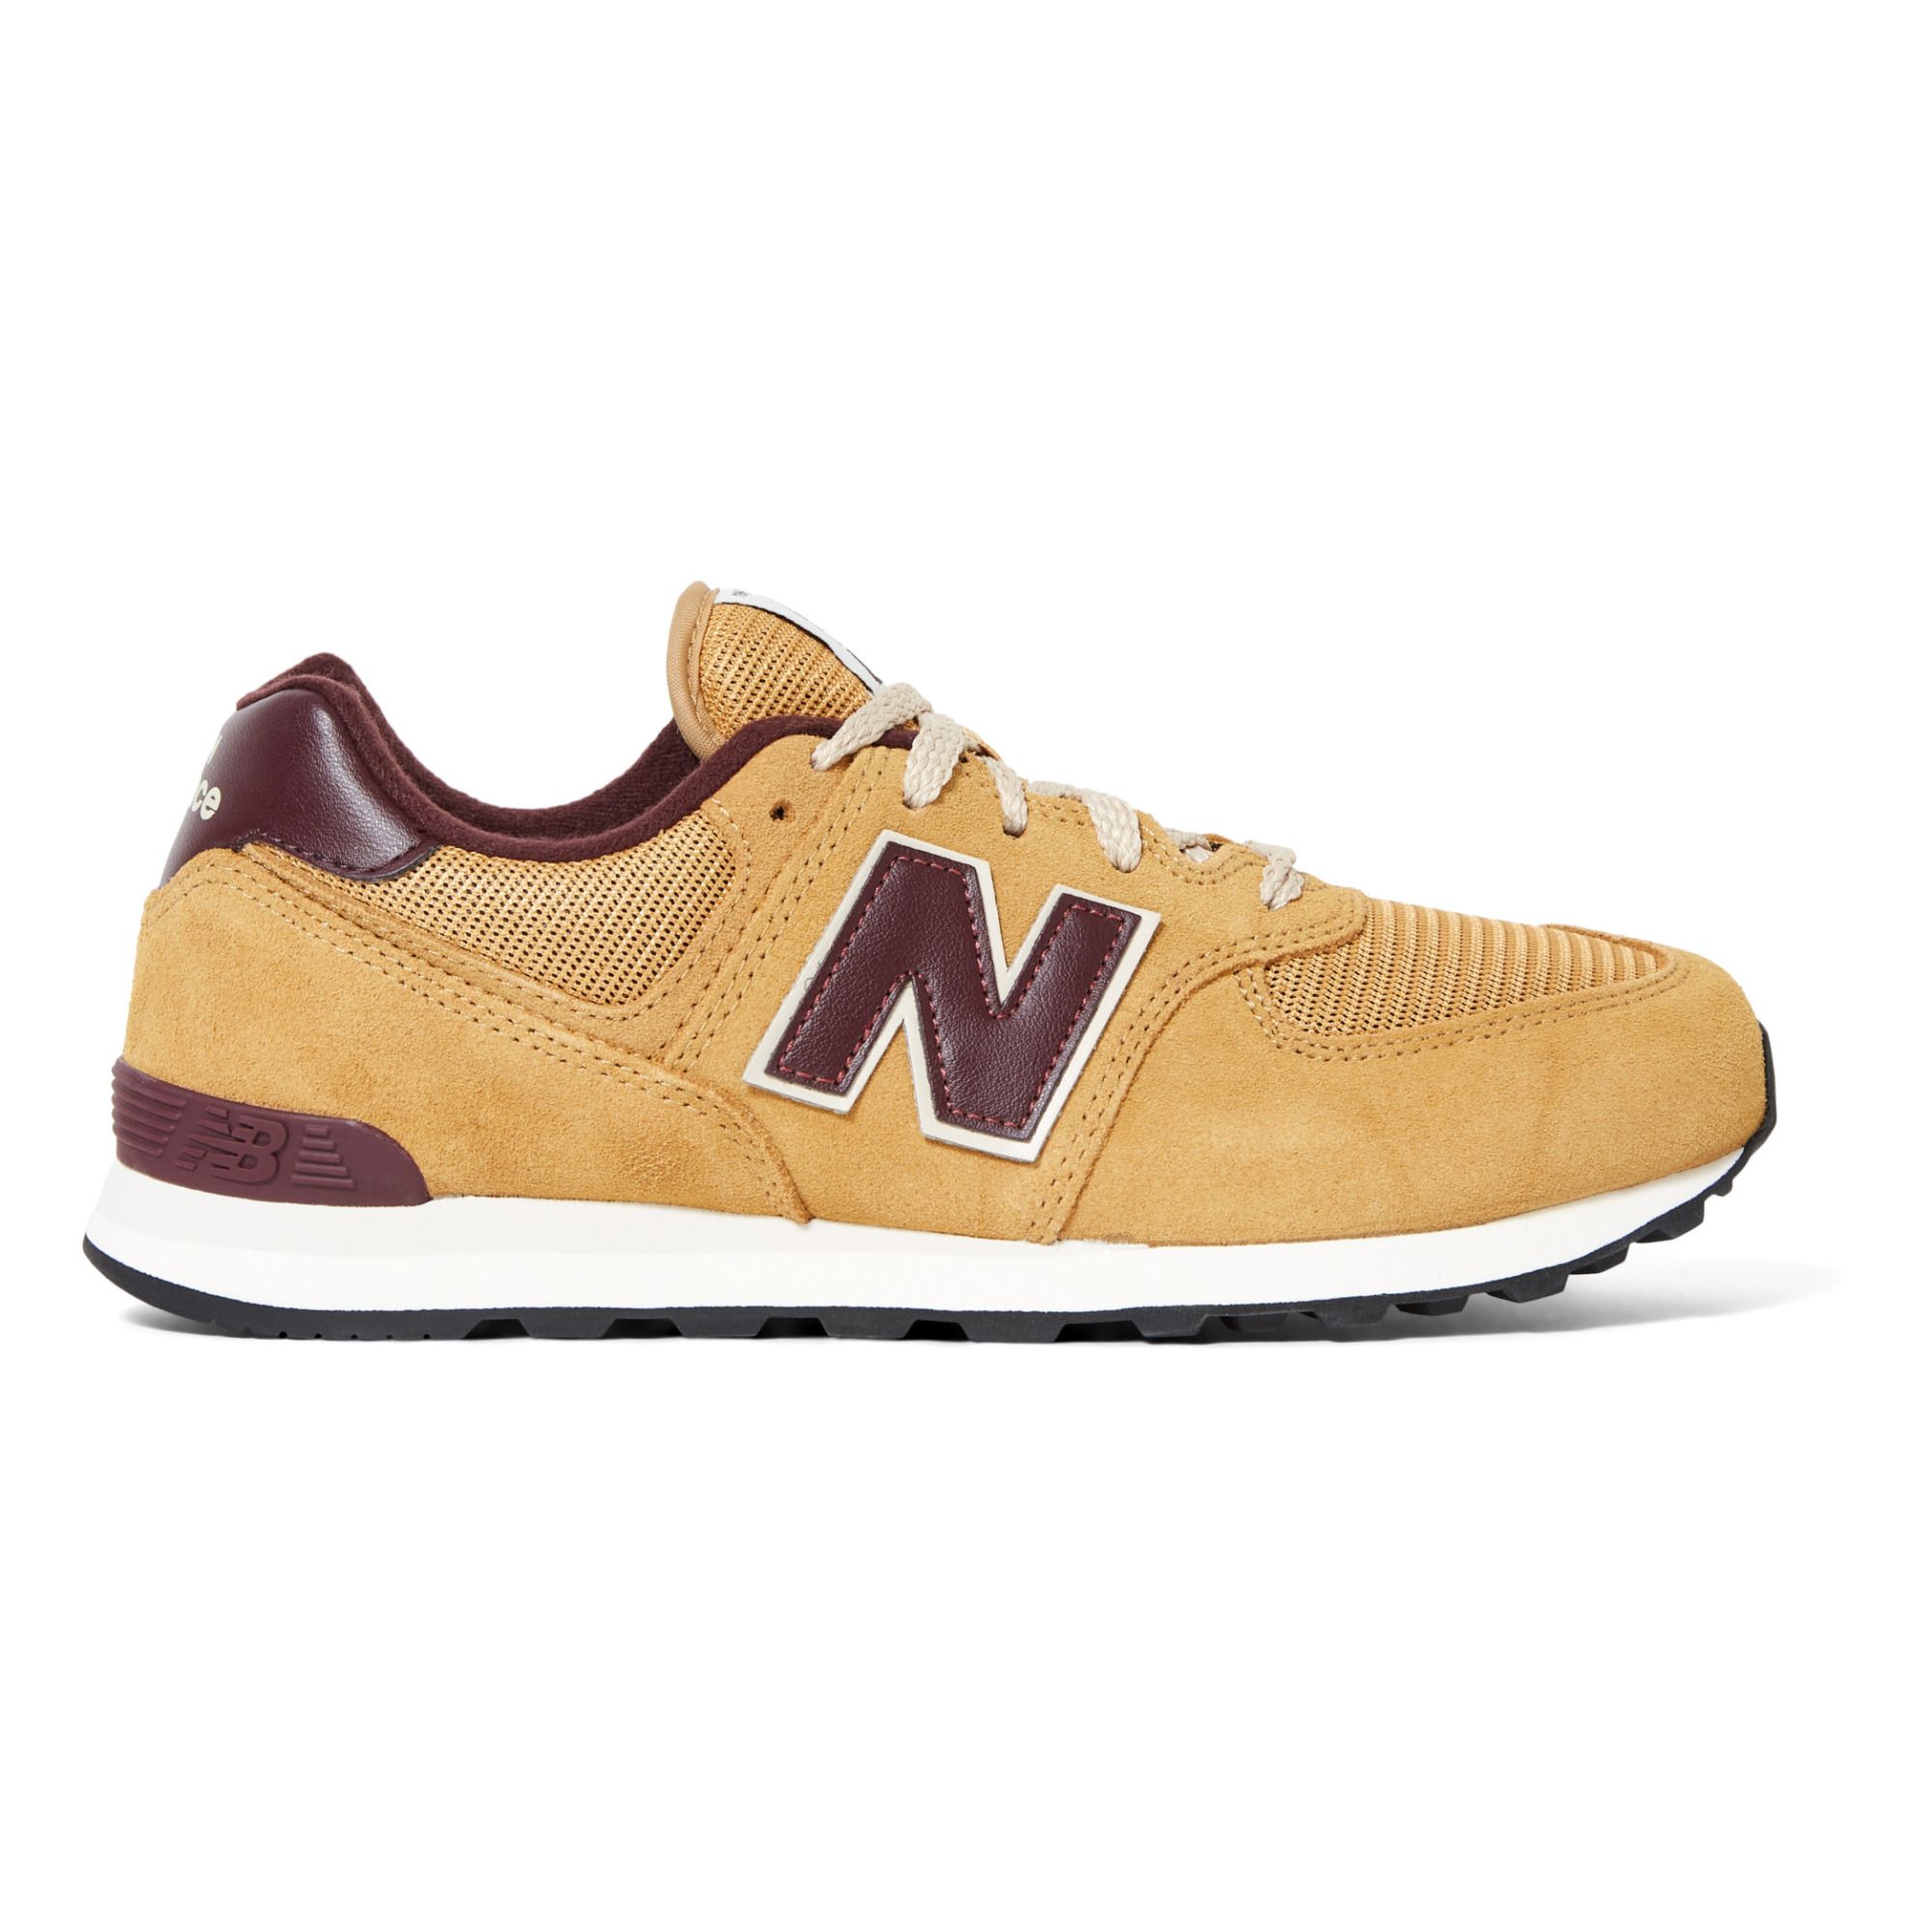 New Balance - Baskets 574 Lacets - Fille - Jaune moutarde